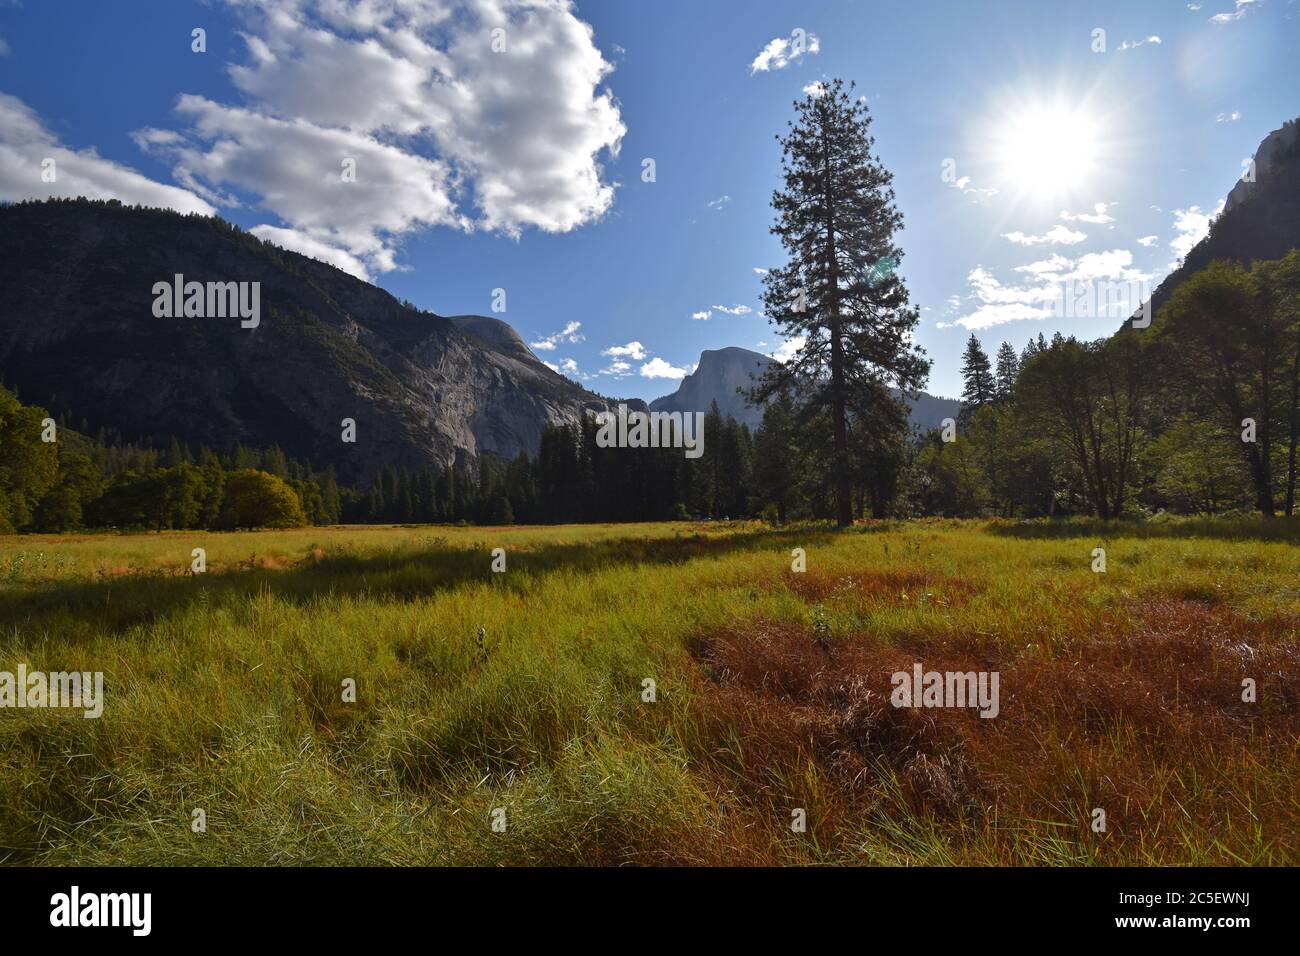 Meadow in Yosemite Valley featuring Half Dome and rock formations in the background. Fall / Autumn colours with red and yellow grass in the meadow. Stock Photo